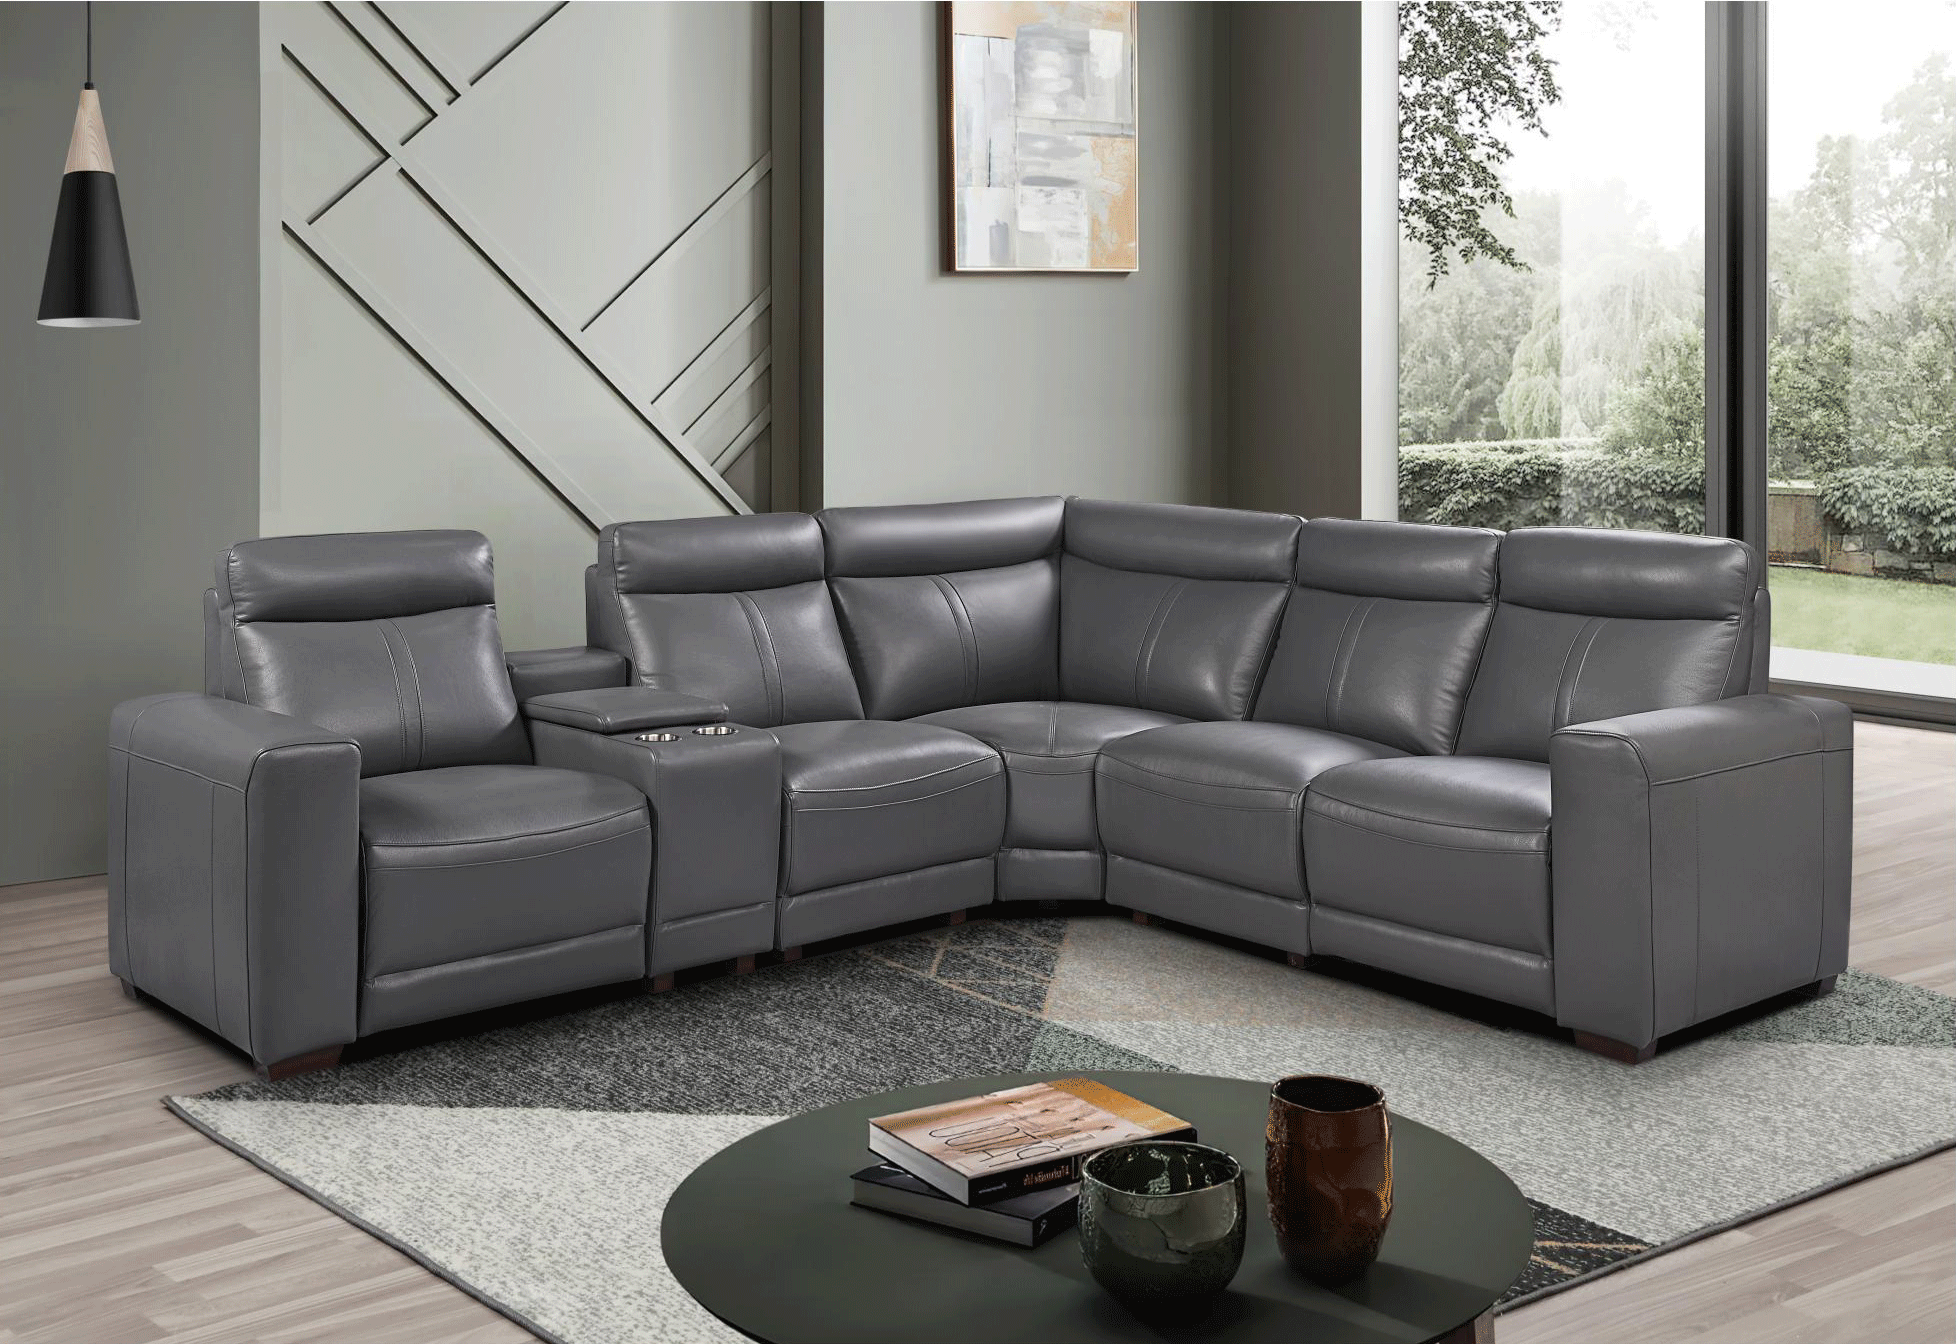 Brands WCH Modern Living Special Order 2777 Sectional w/ recliners